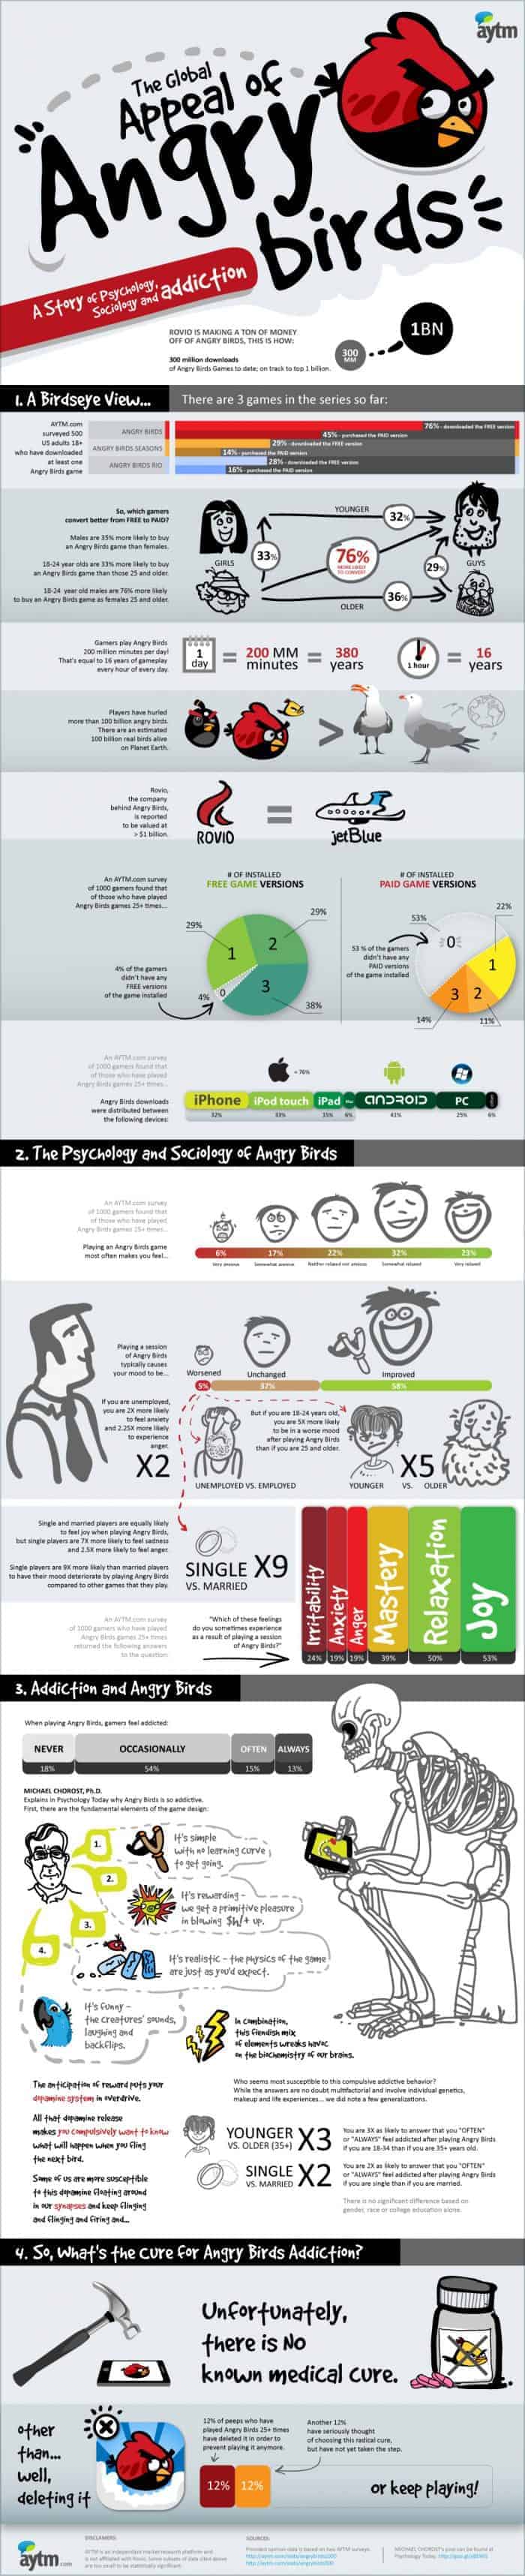 Angry Birds Addiction Infographic